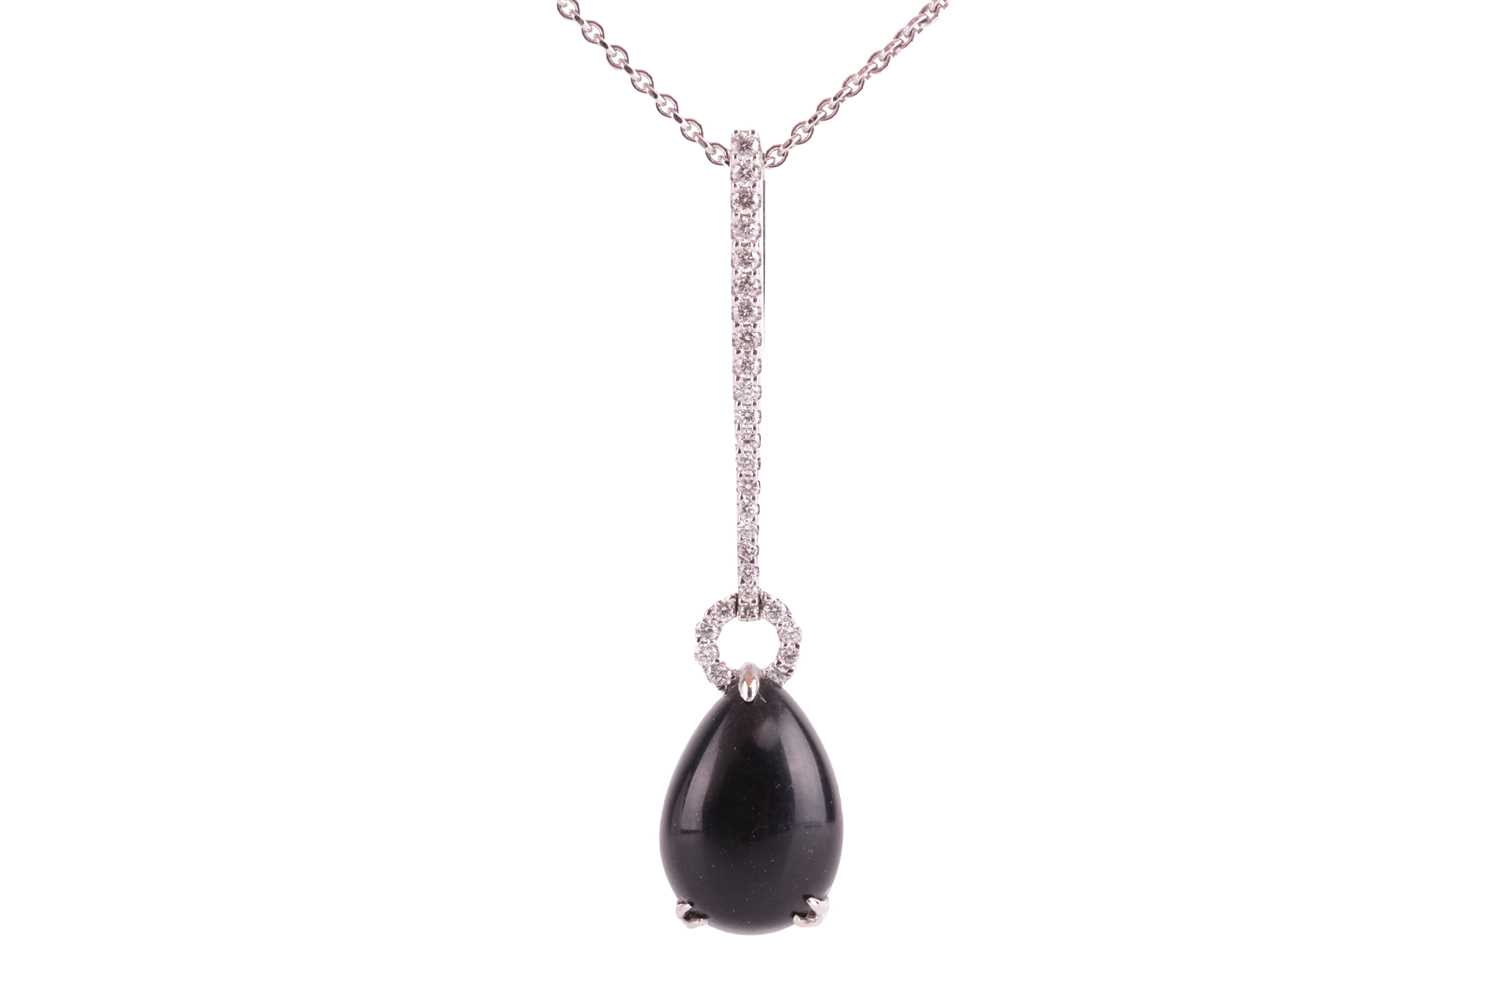 A Whitby jet and diamond drop pendant on chain, featuring a teardrop-shaped jet cabochon of 13.0 x 9